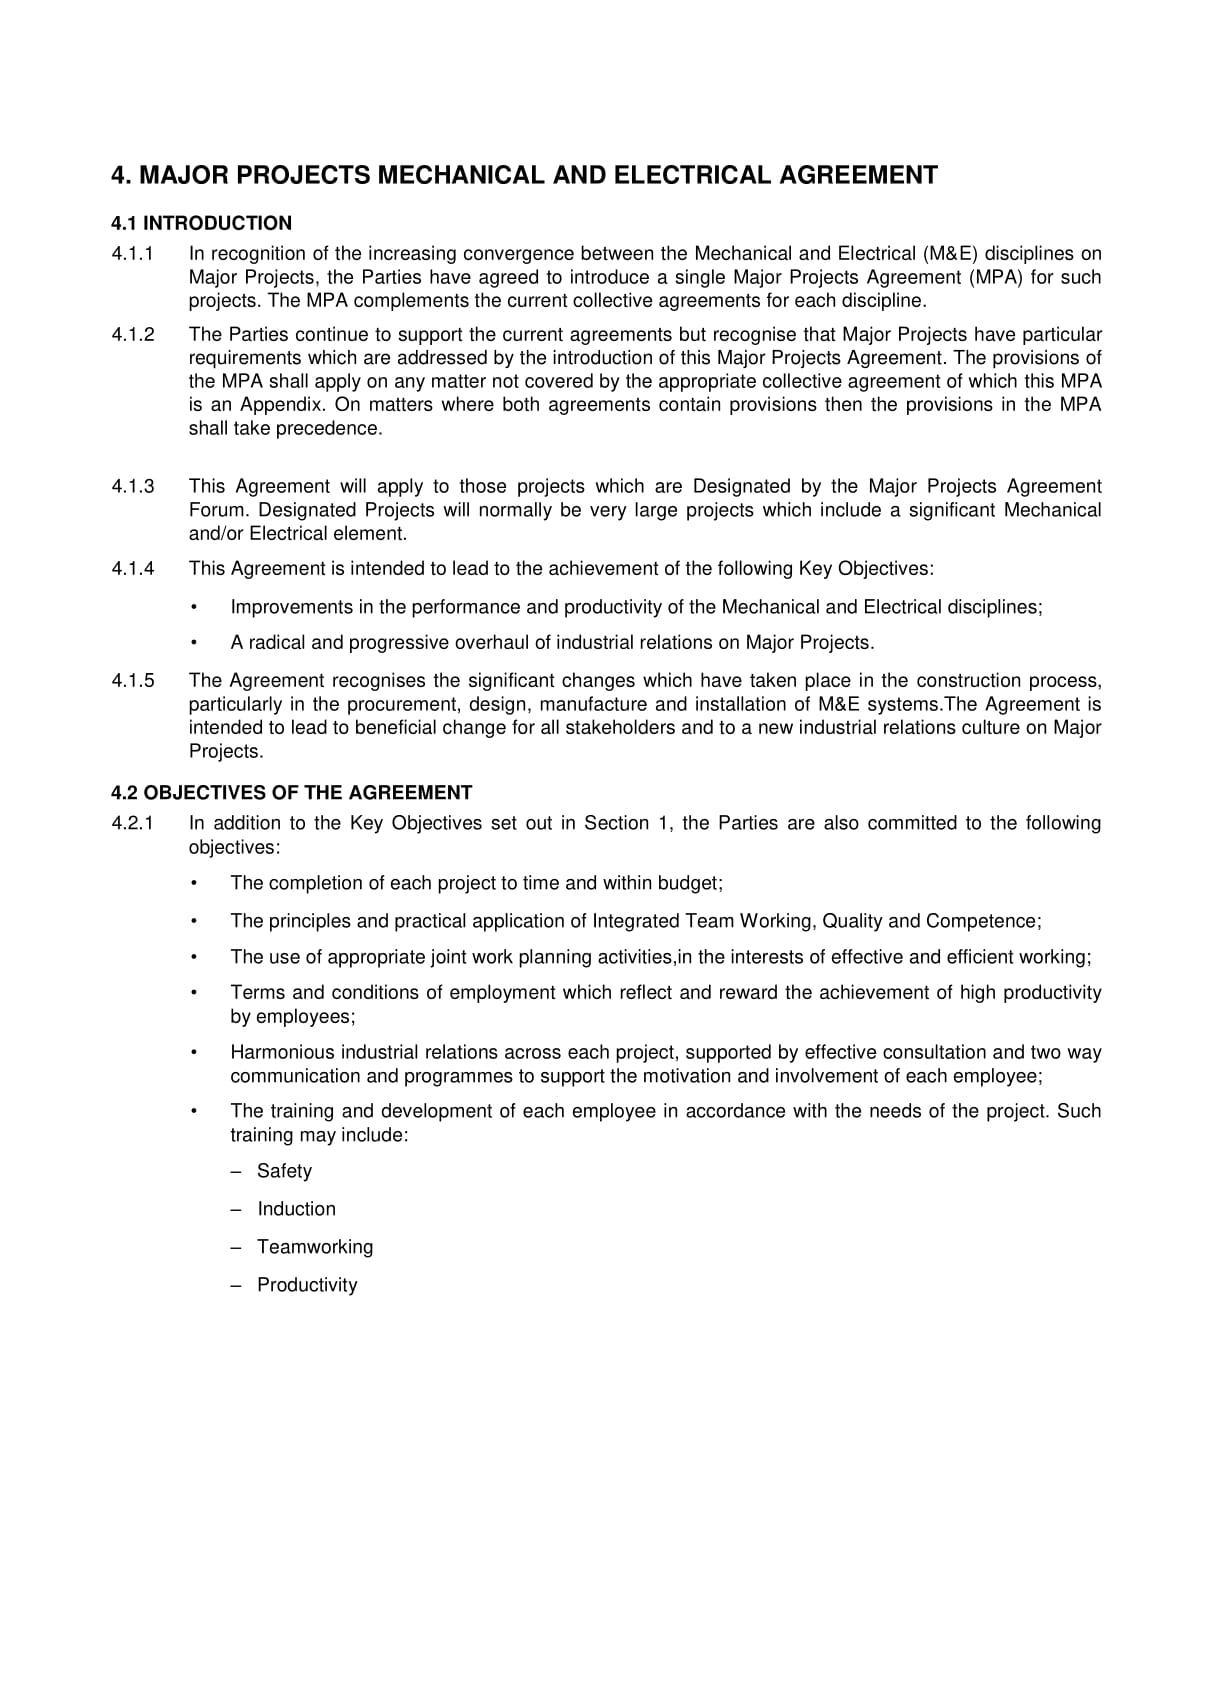 mechanical and electrical agreement contract for major construction projects template example 01